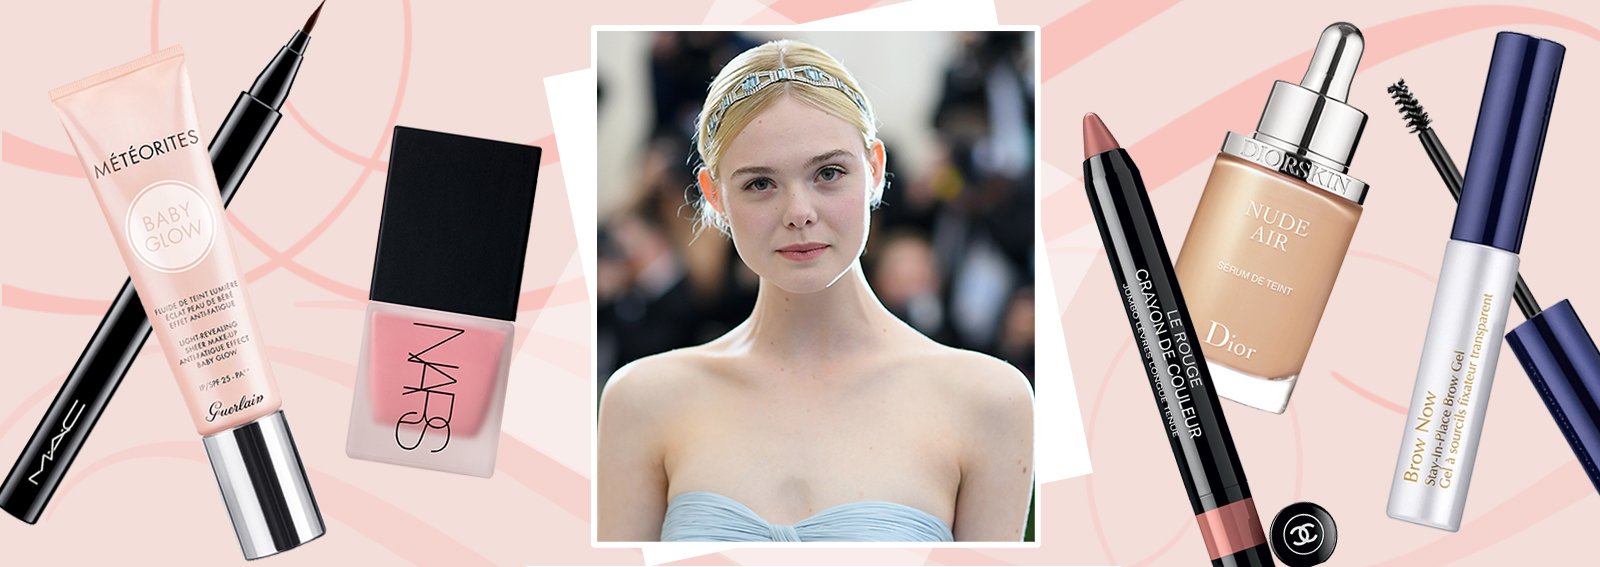 Elle Fanning make up: copia il look nude